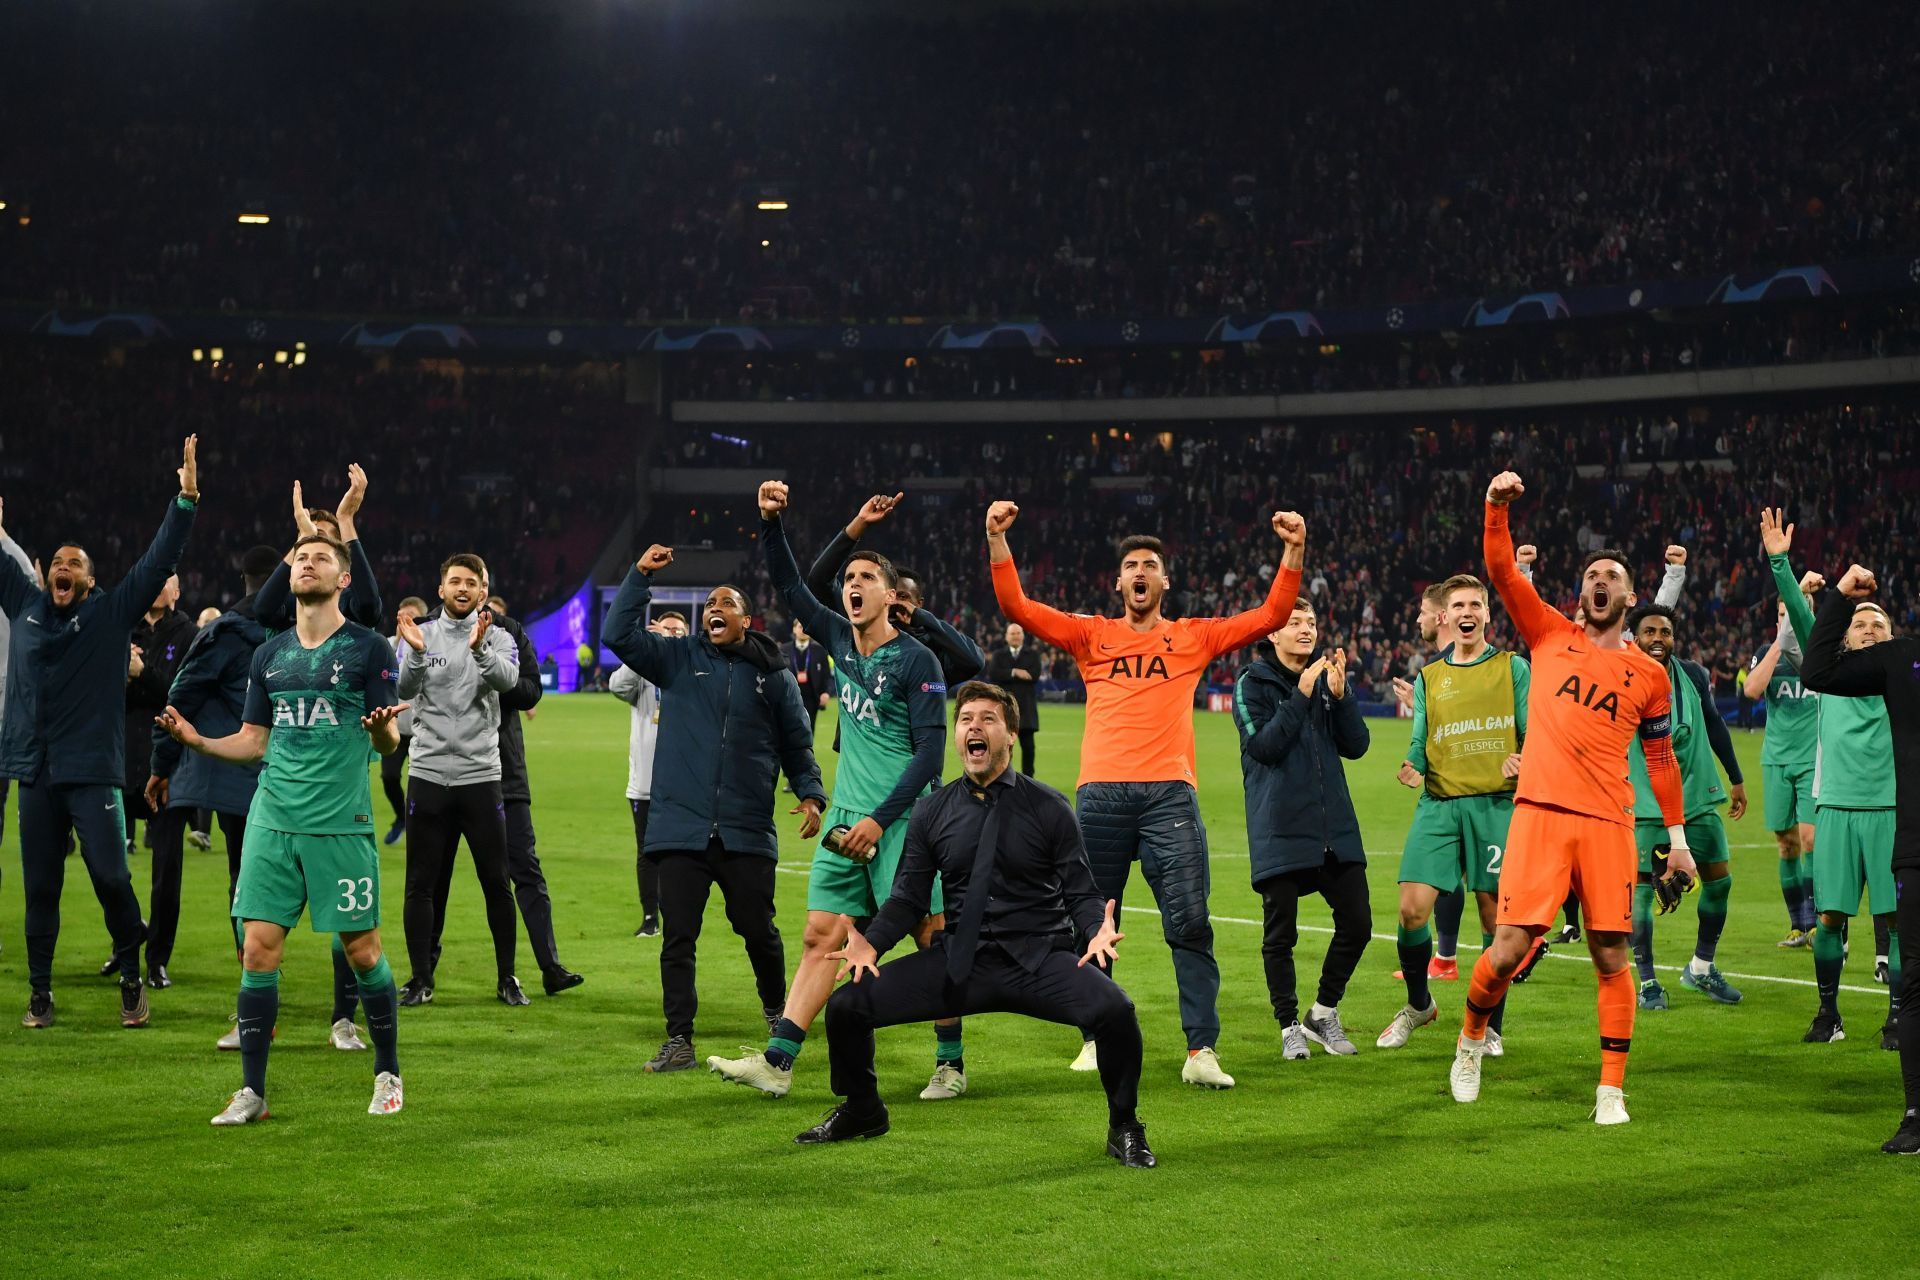 Spurs reached the Champions League Final in thrilling style in 2019